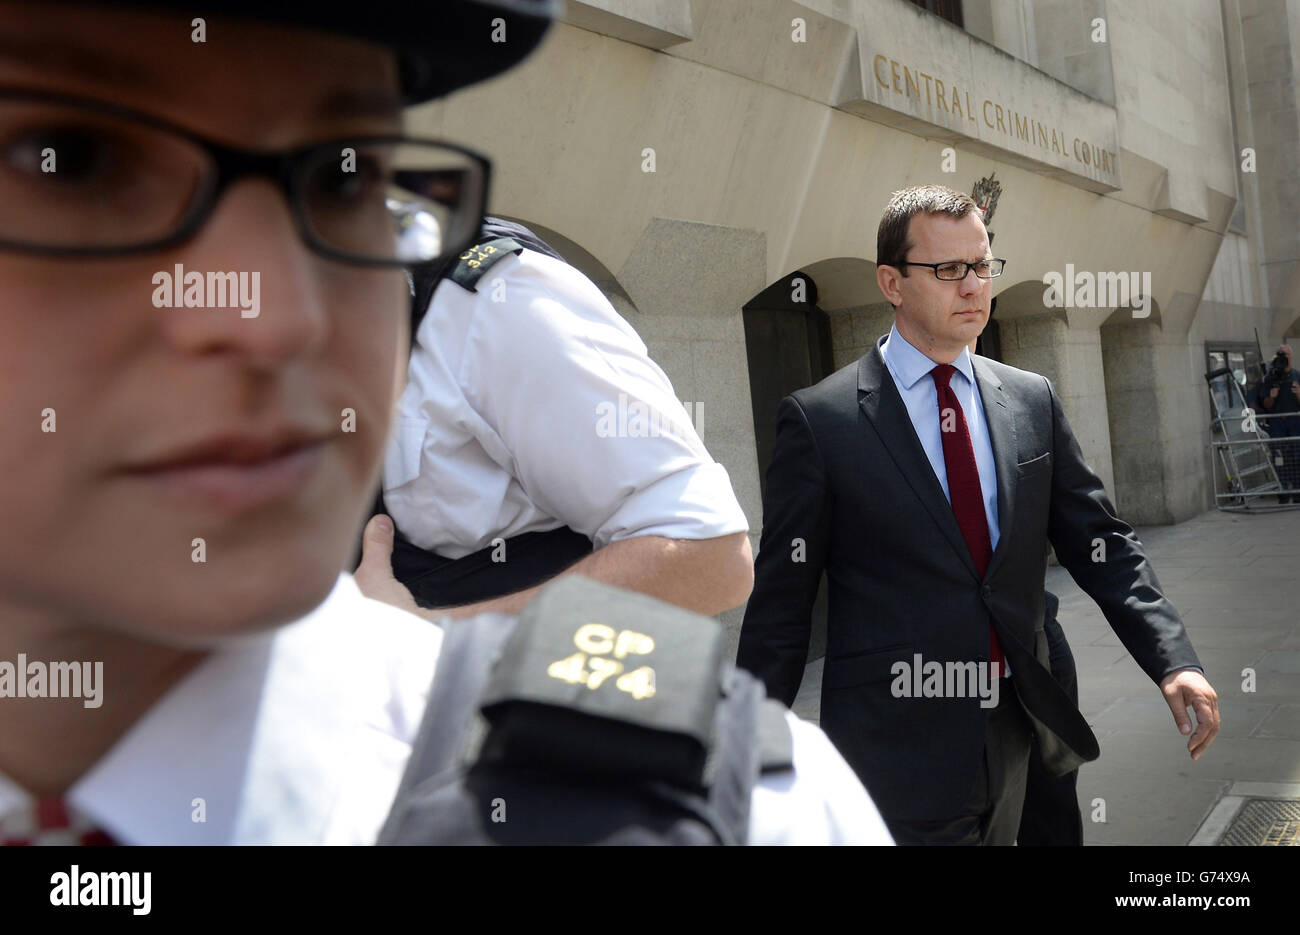 Former News of the World editor Andy Coulson leaves the Old Bailey in London, after Prime Minister David Cameron was heavily criticised for almost collapsing the phone hacking trial in its final stages by commenting on ex No 10 spin doctor Andy Coulson's conviction for phone hacking while the jury was still deliberating. Stock Photo